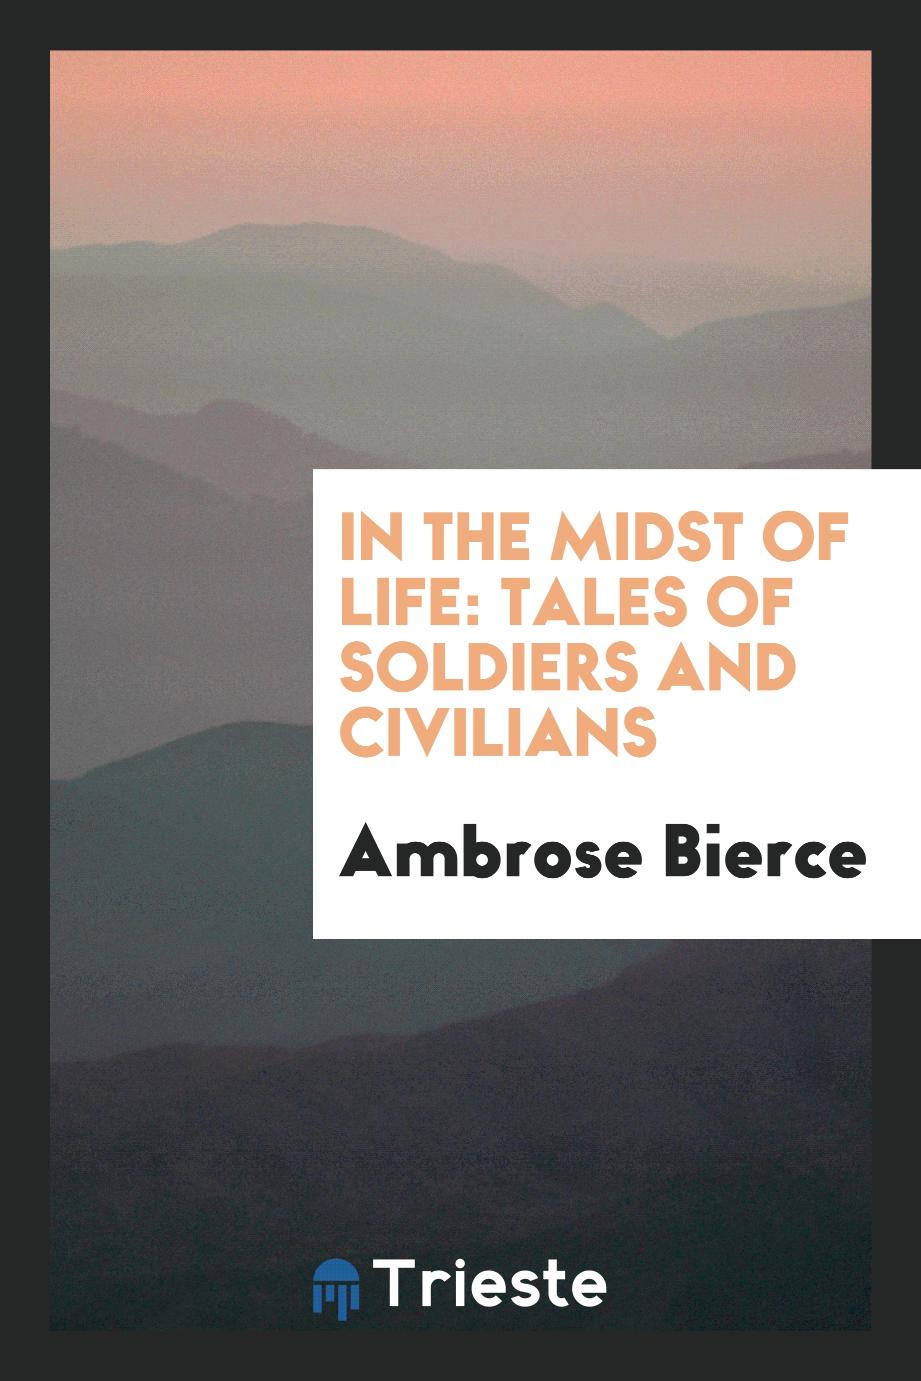 In the midst of life: tales of soldiers and civilians